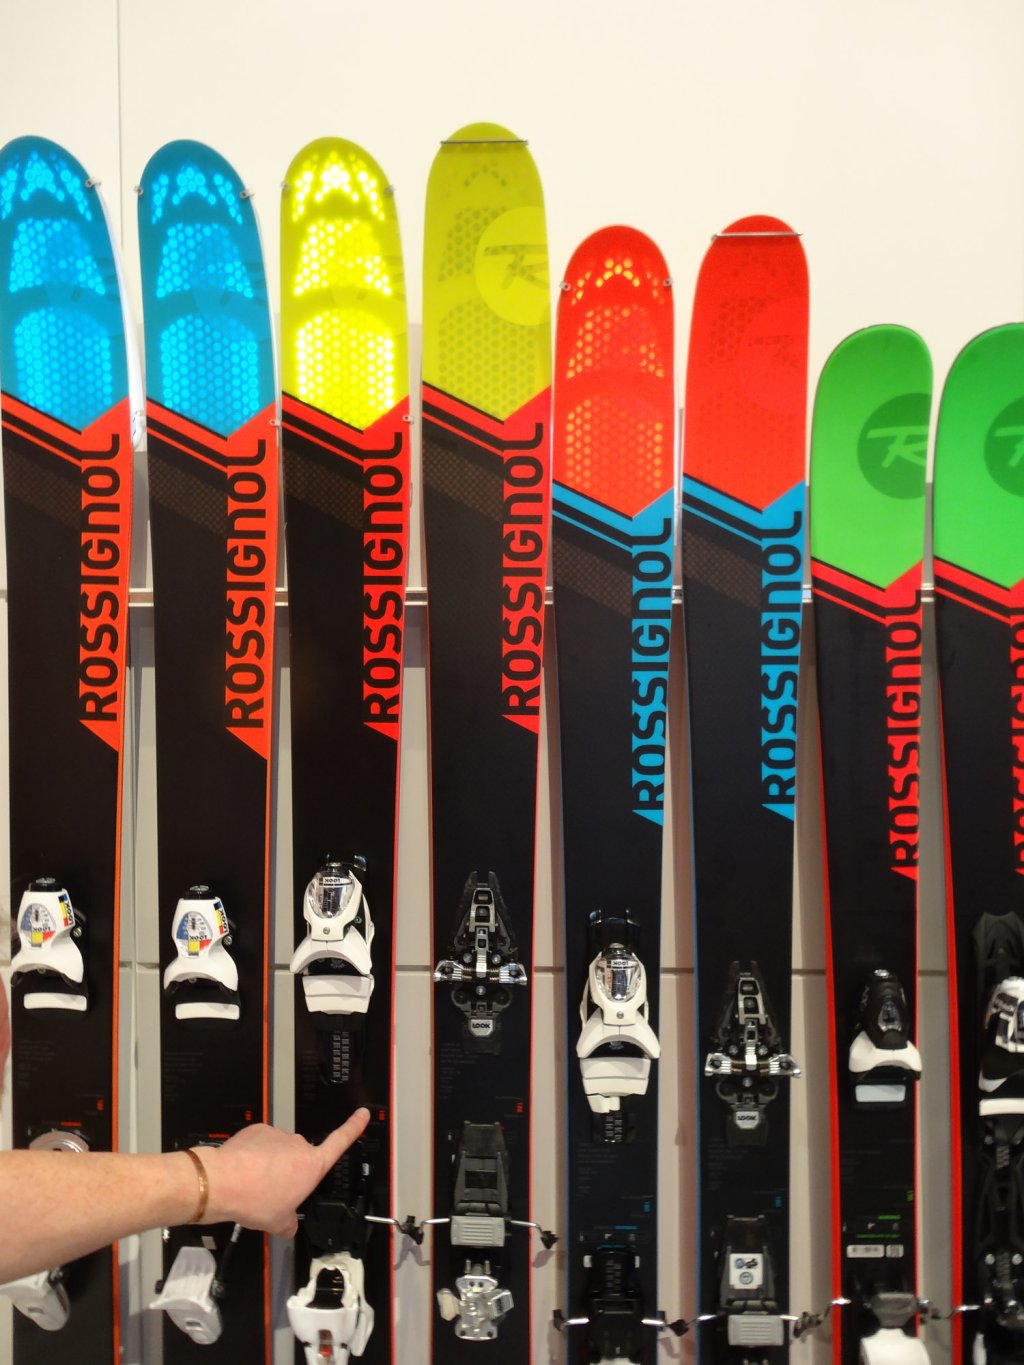 Rossignol has given the 7 series an update in the form of a lighter structure and upper belt with more touring stiffness in the proven shapes.